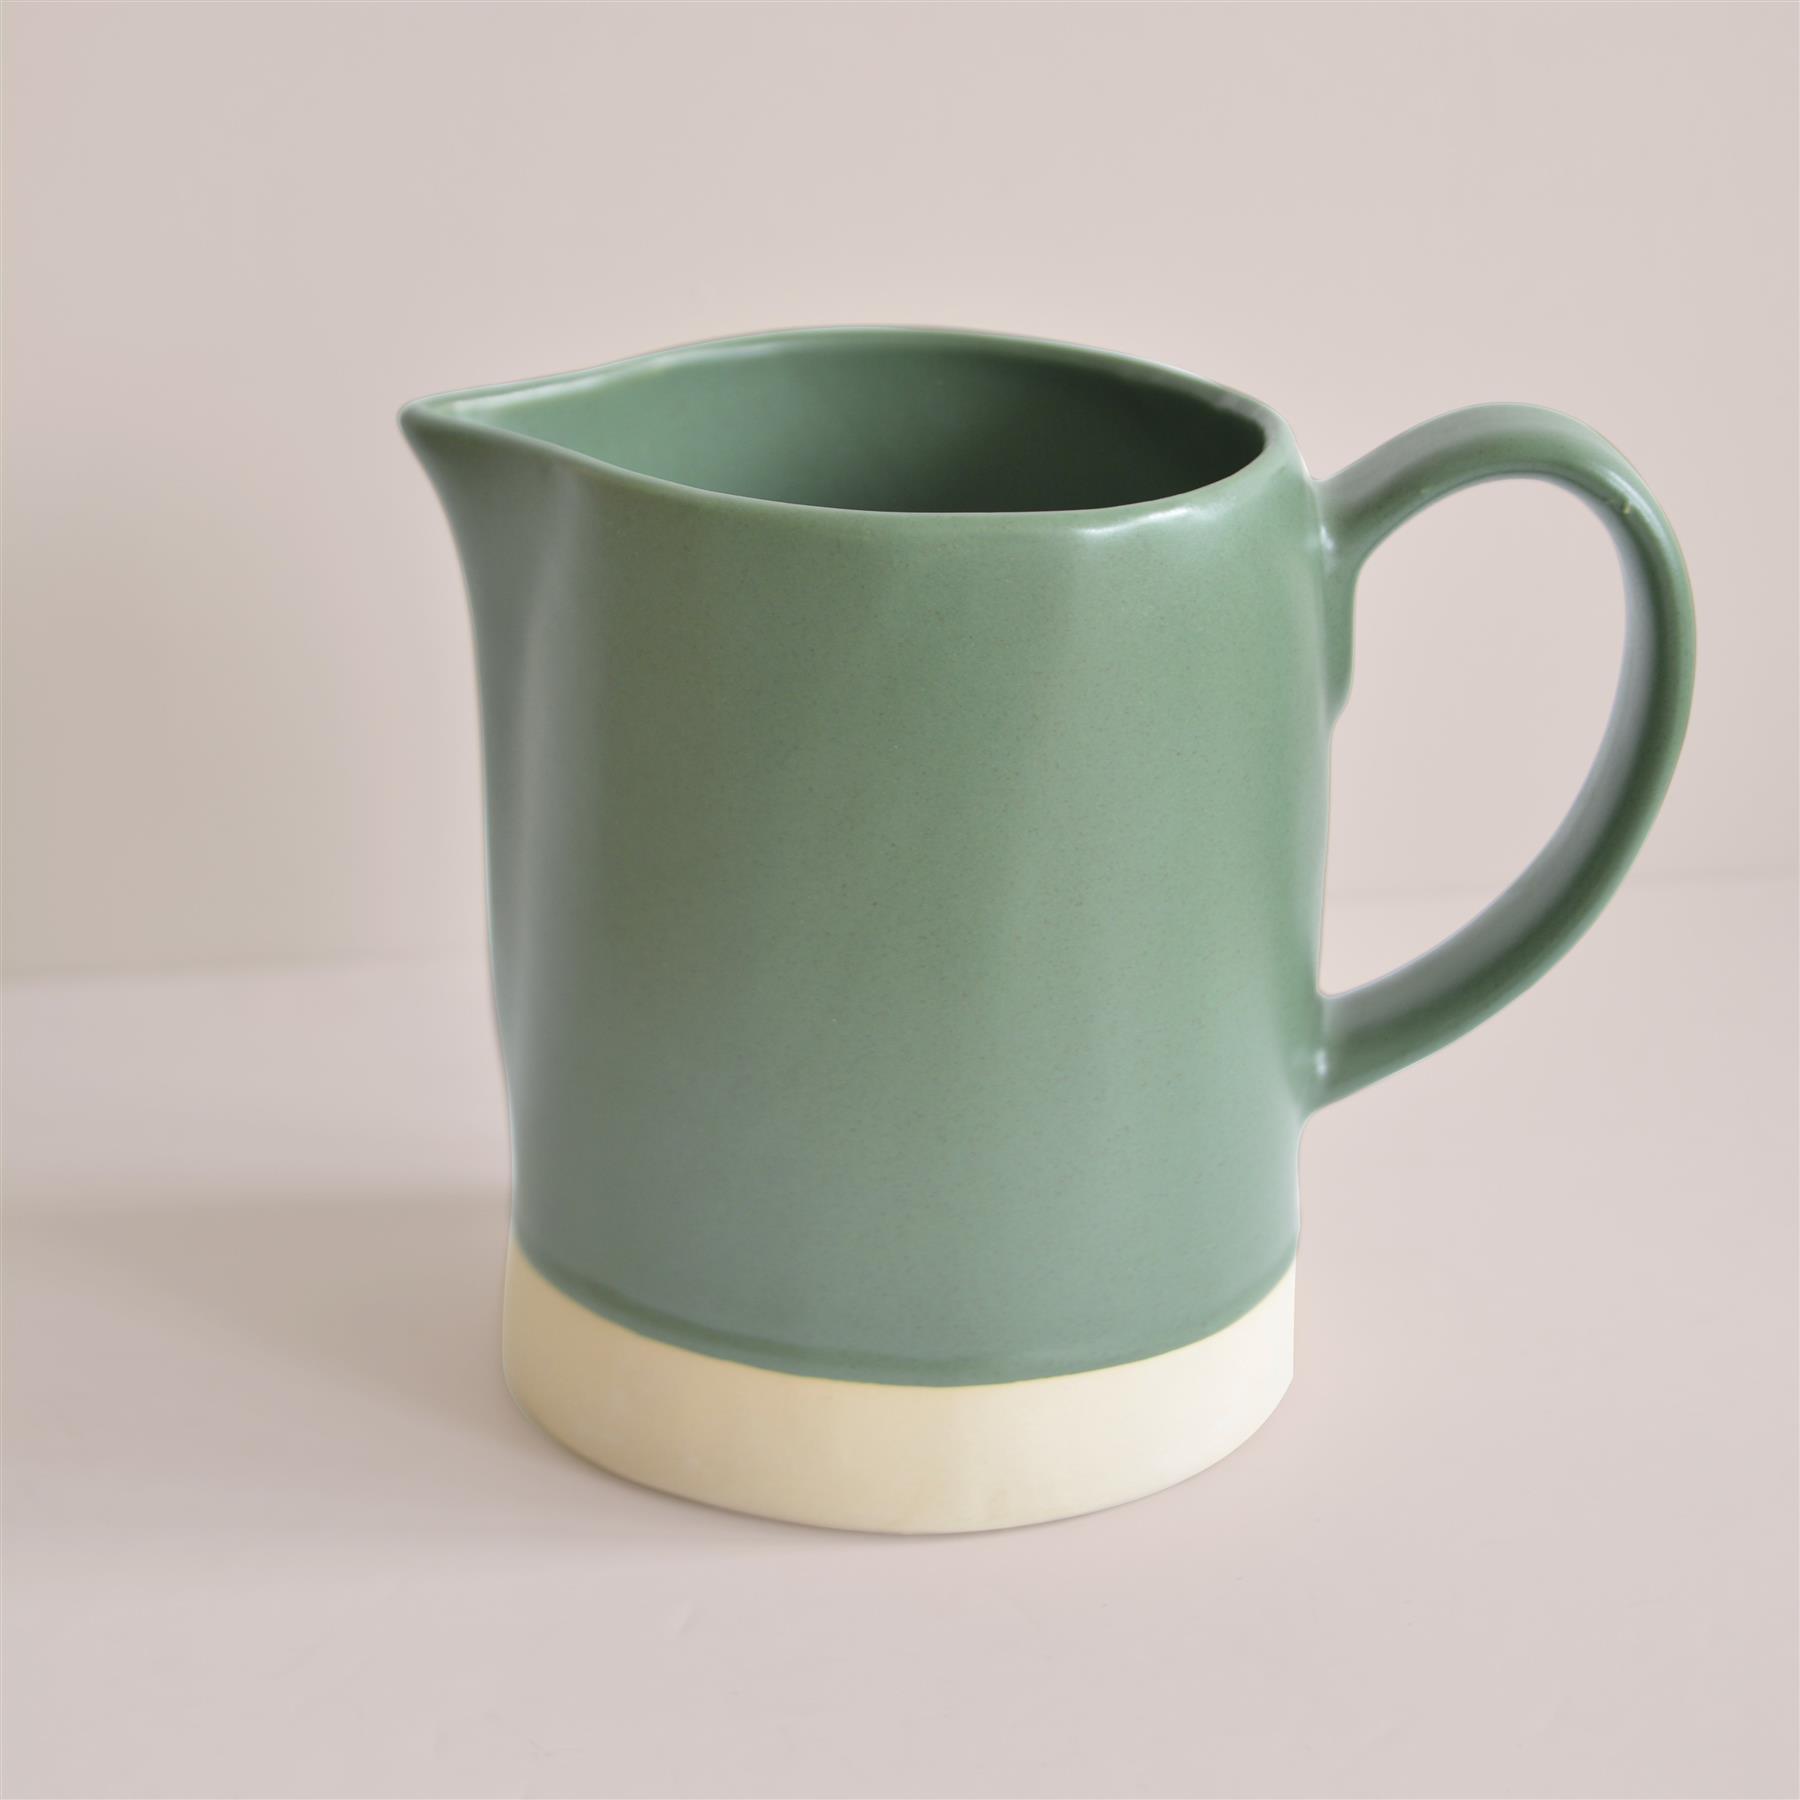 Hand made Jug in Courgette Green